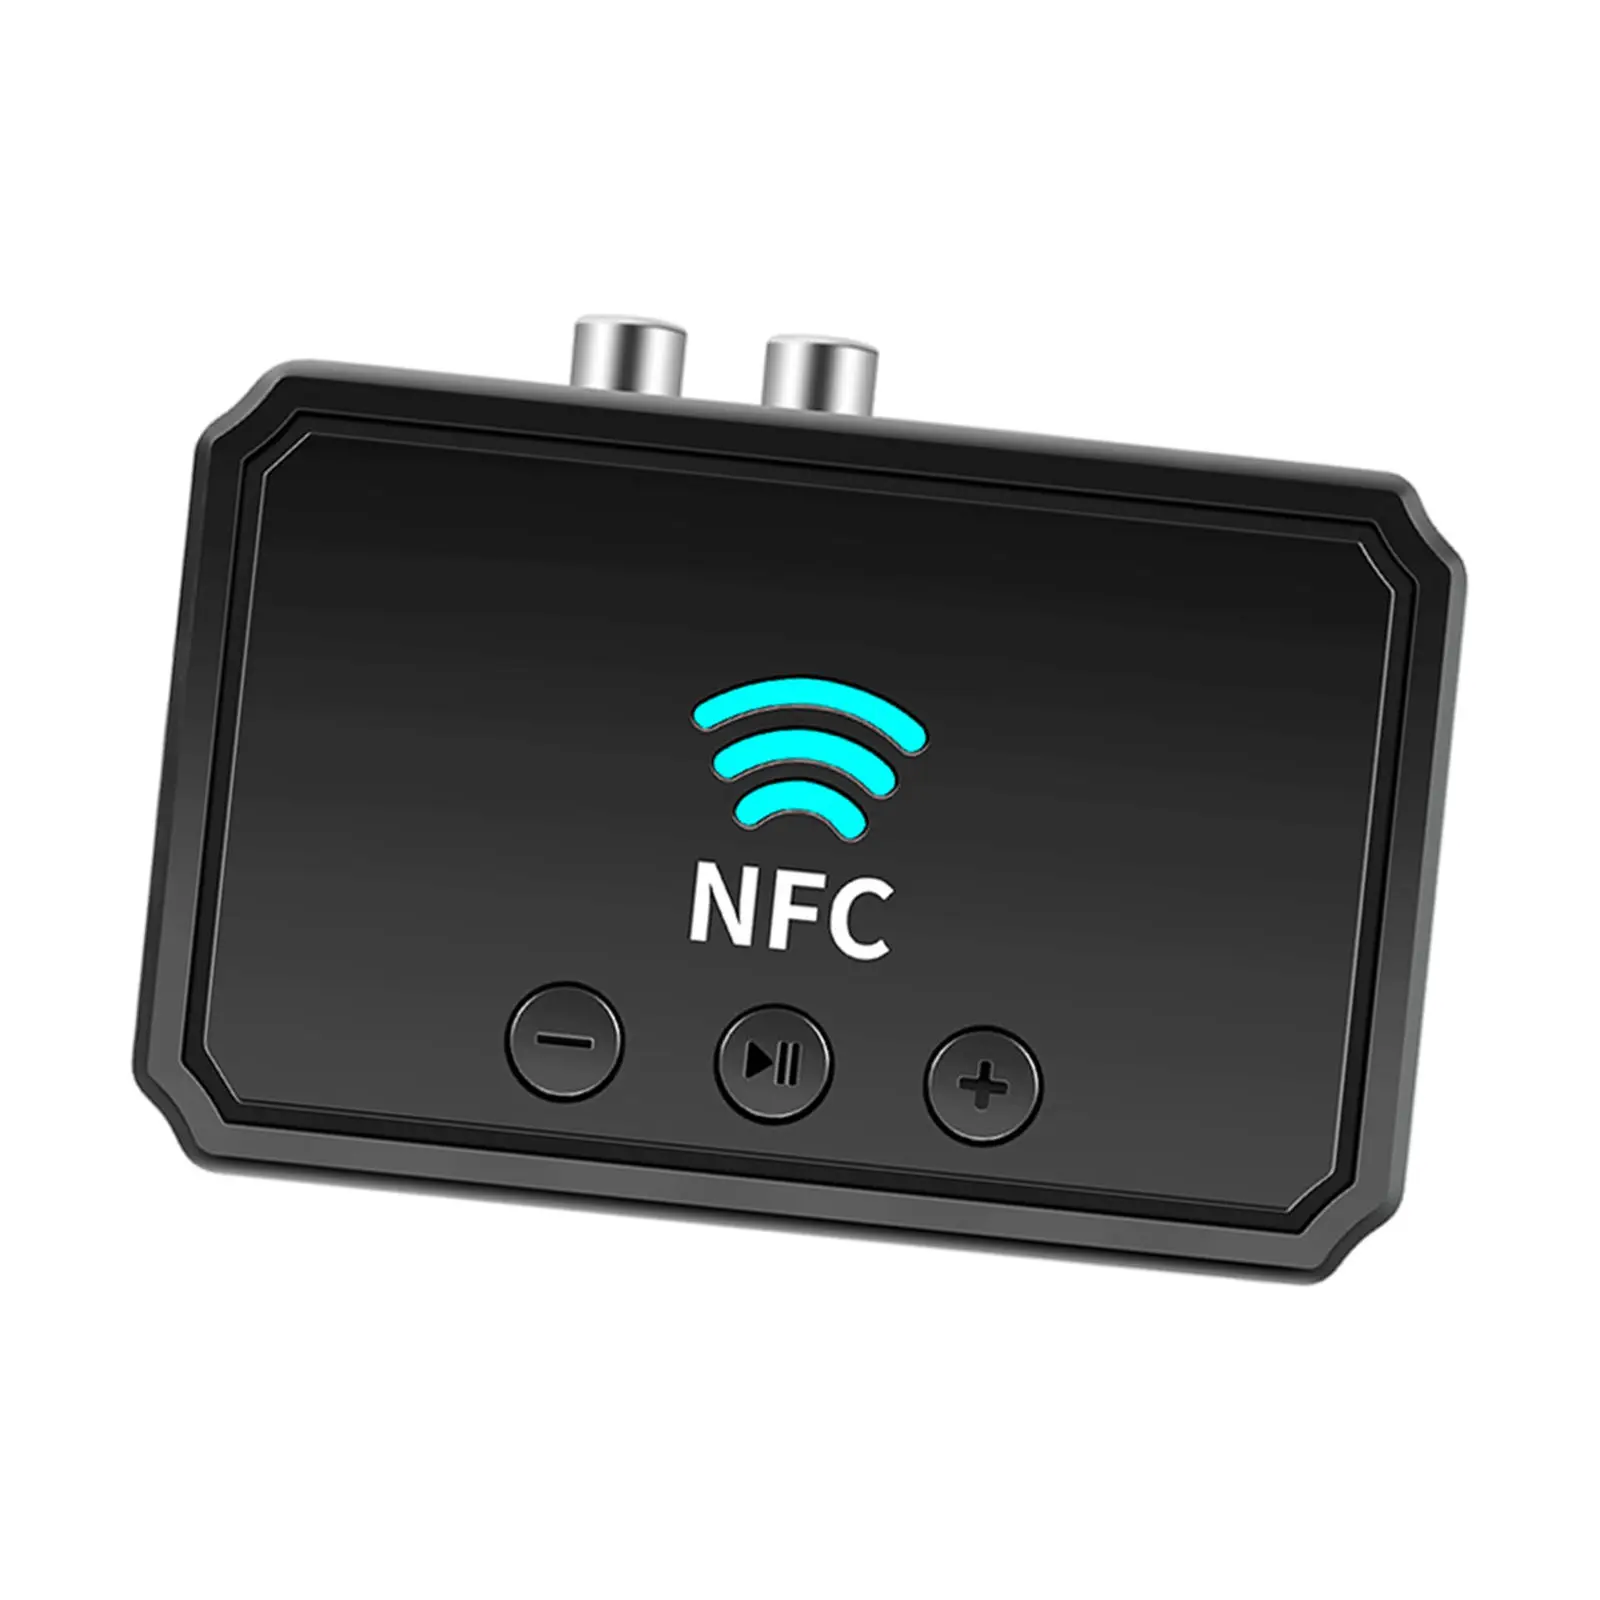 NFC Bluetooth 5.0 Audio Adapter Transmitter Plug and Play Music Streaming Wireless 3.5mm AUX/RCA Receiver for Speaker Headphone